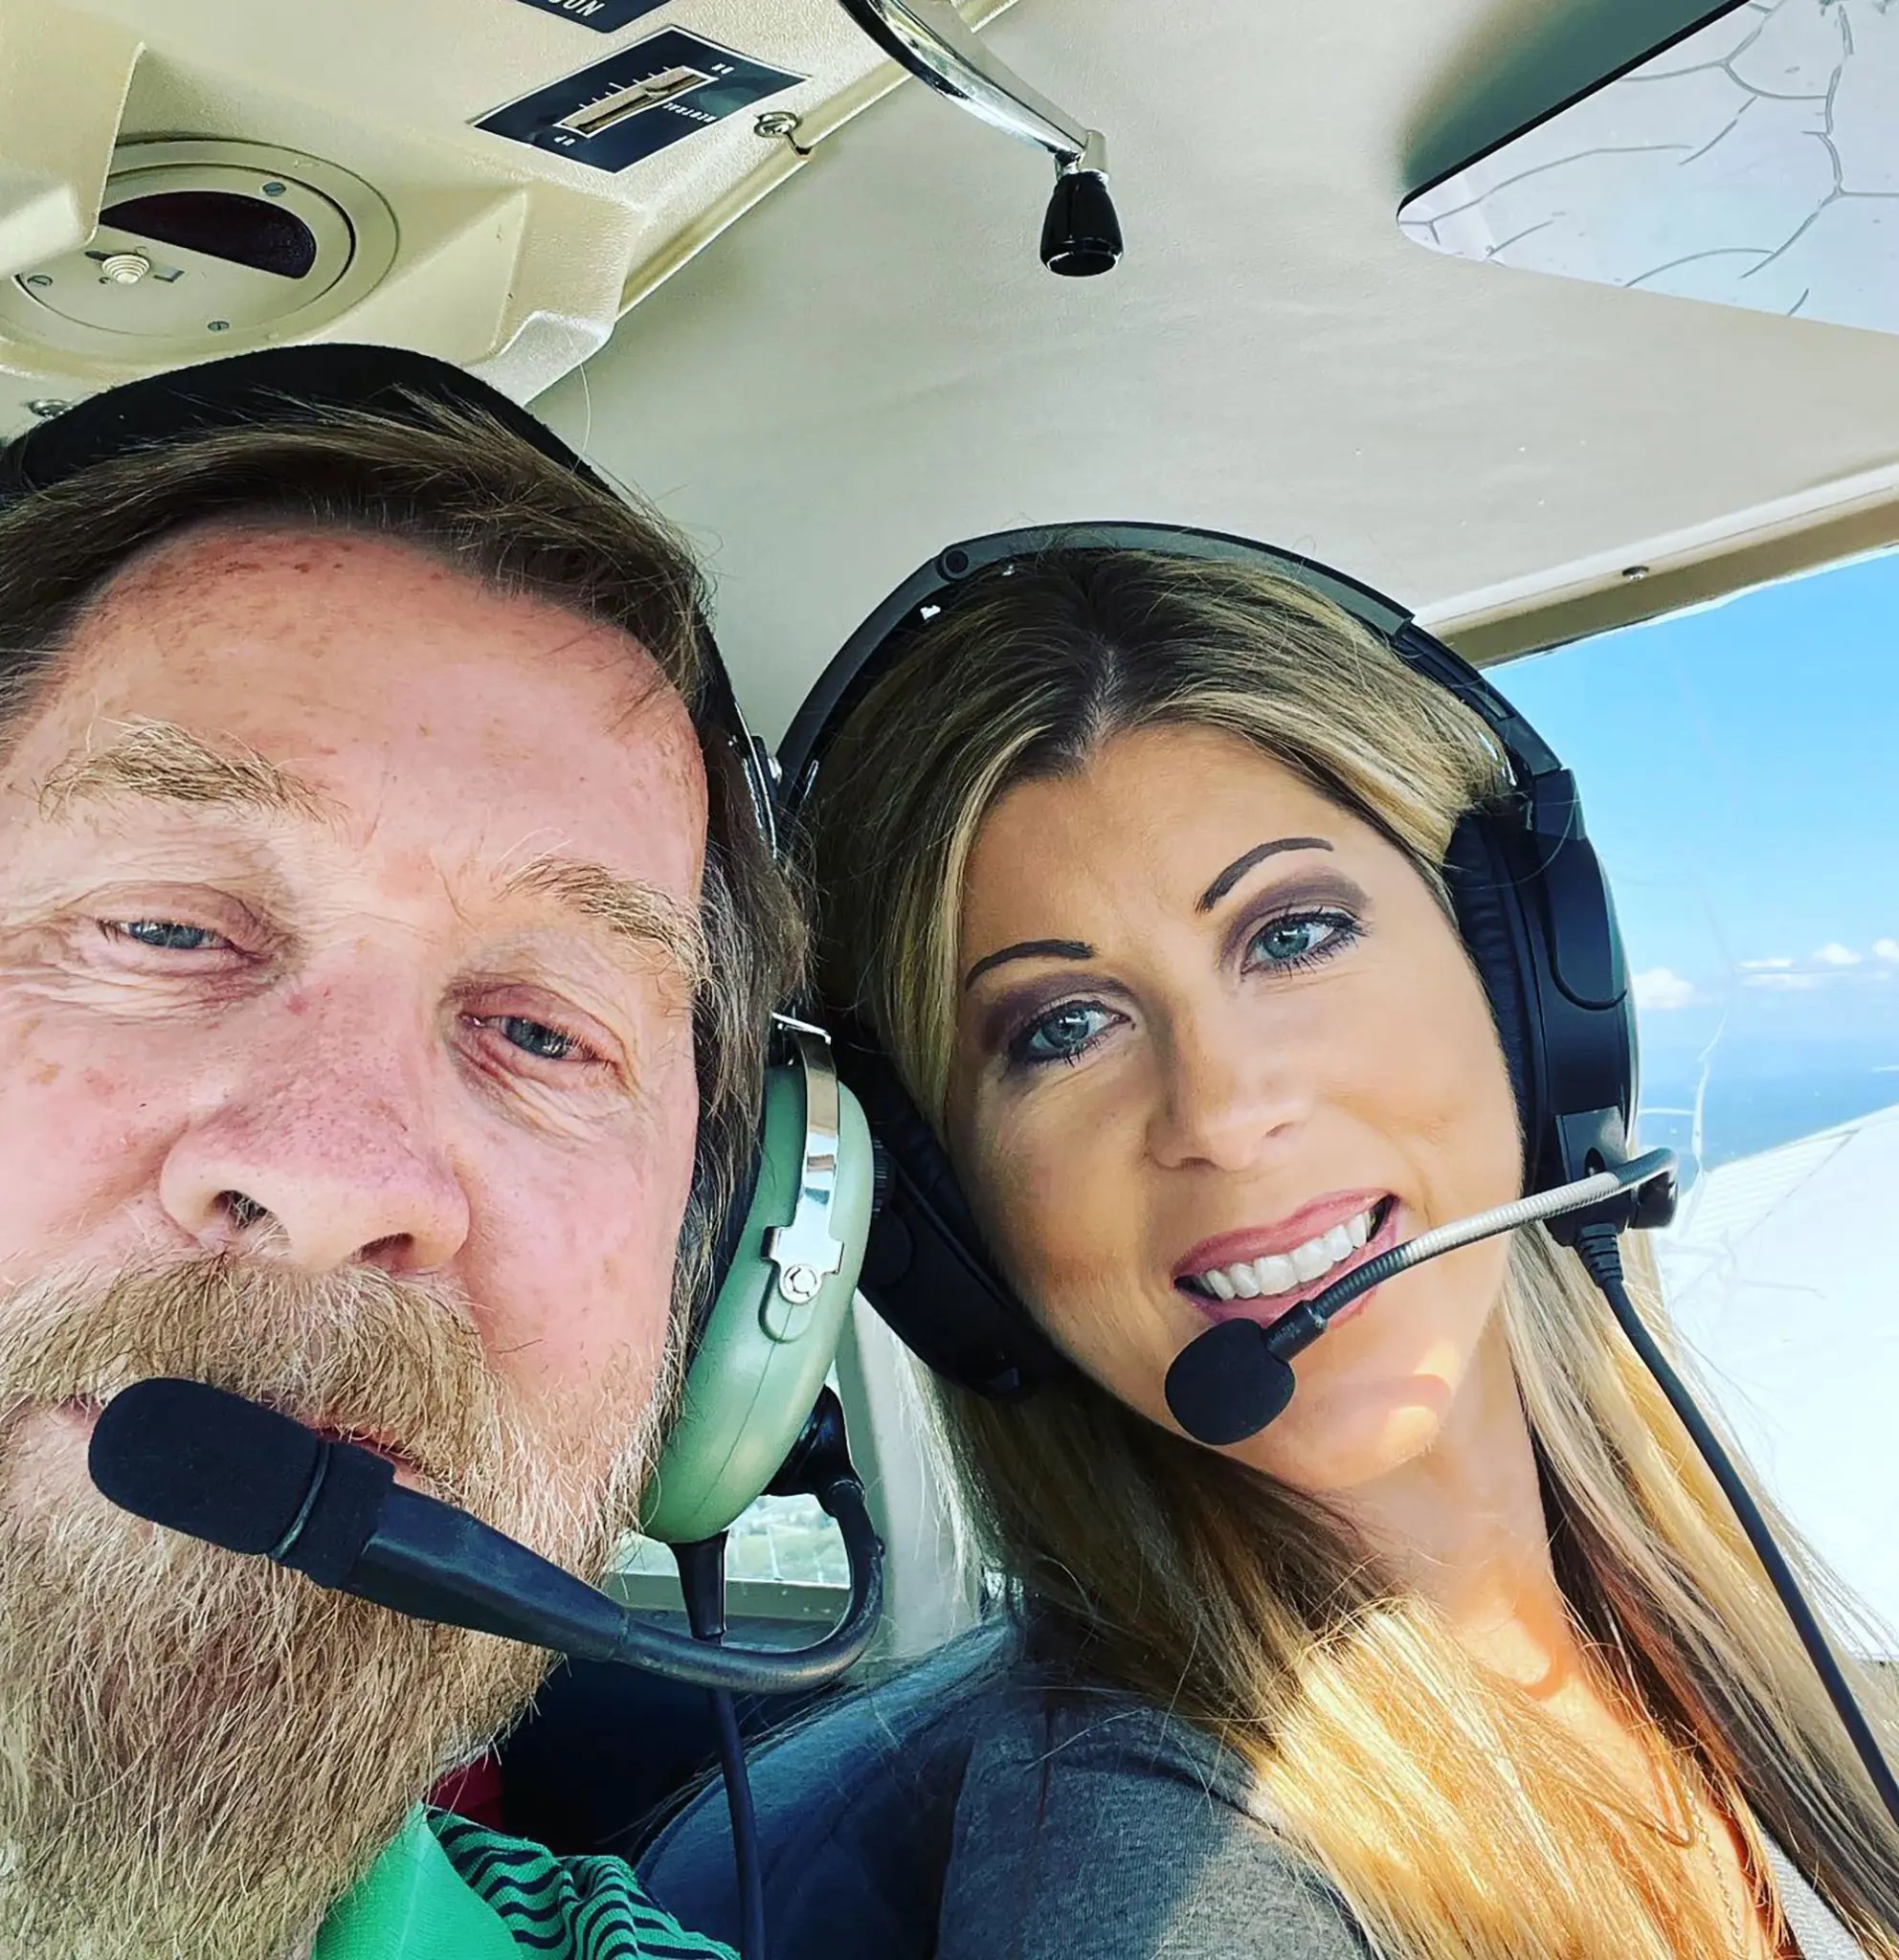 The father-daughter duo regularly filmed their flights together for her popular YouTube channel